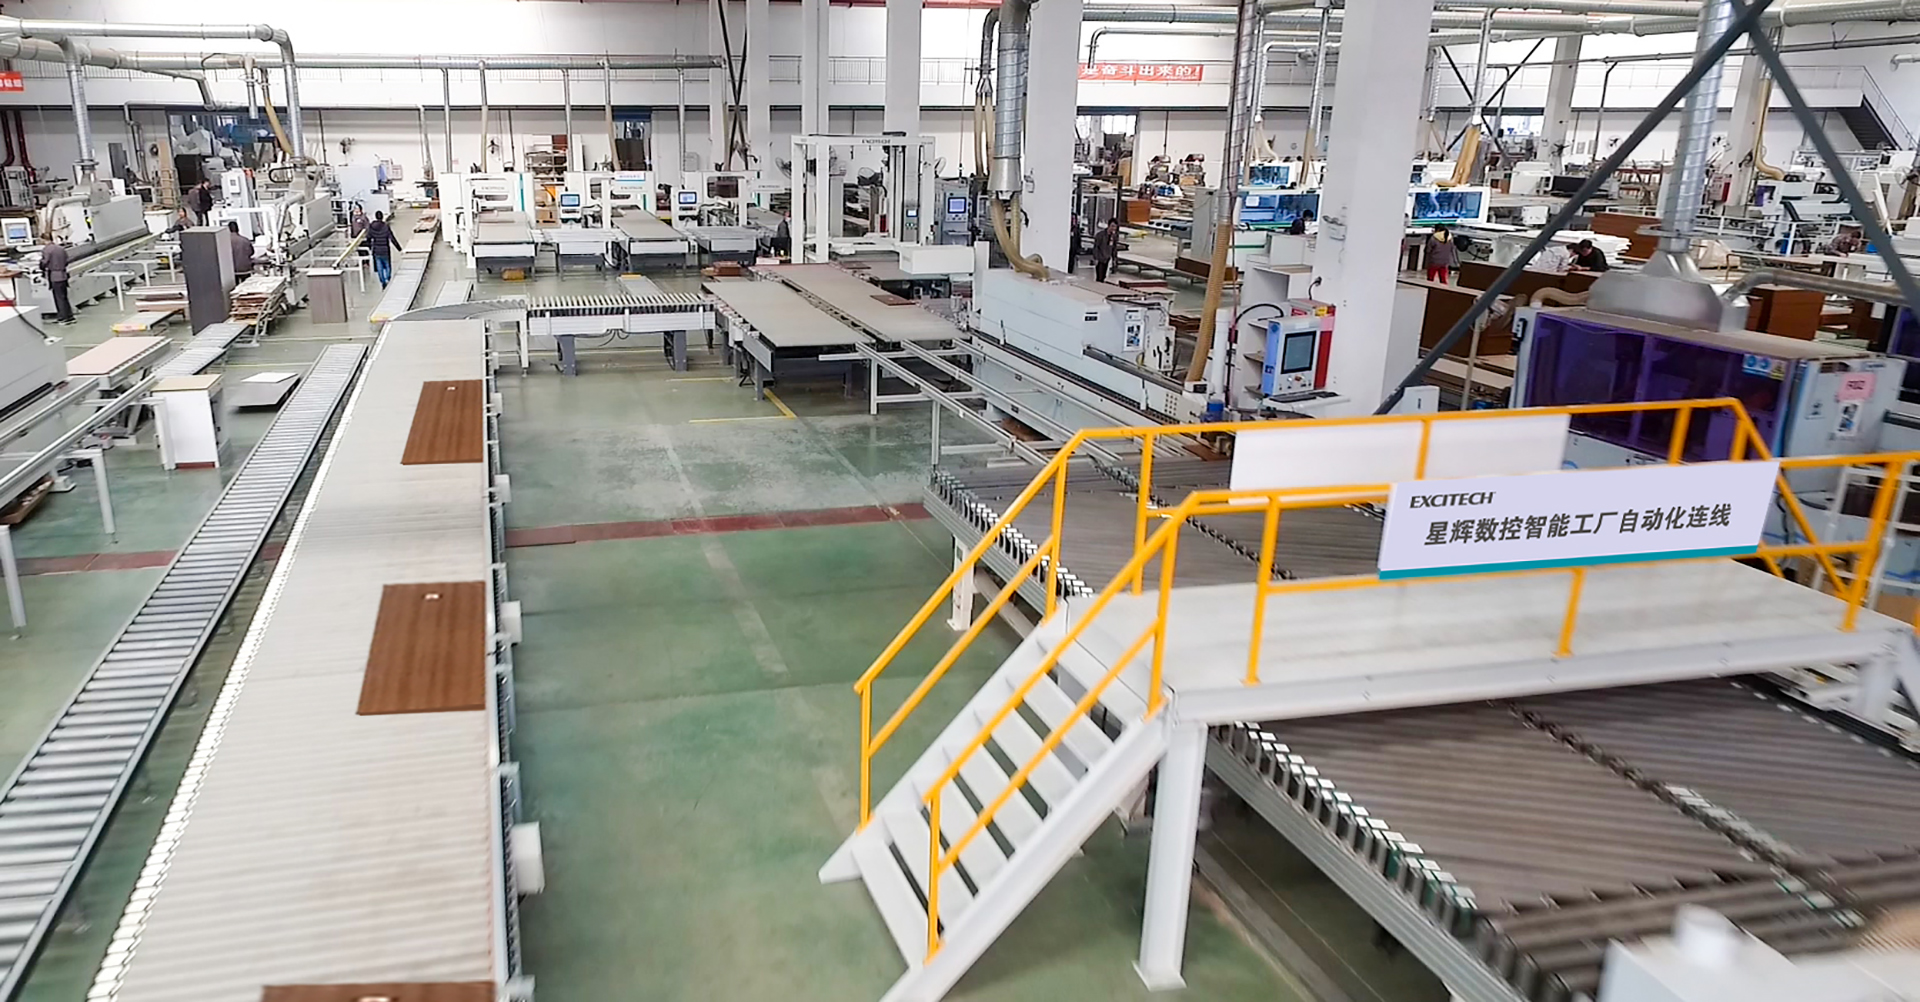 Smart furniture factory produces solutions,and EXCITECH helps you build a smart factory.